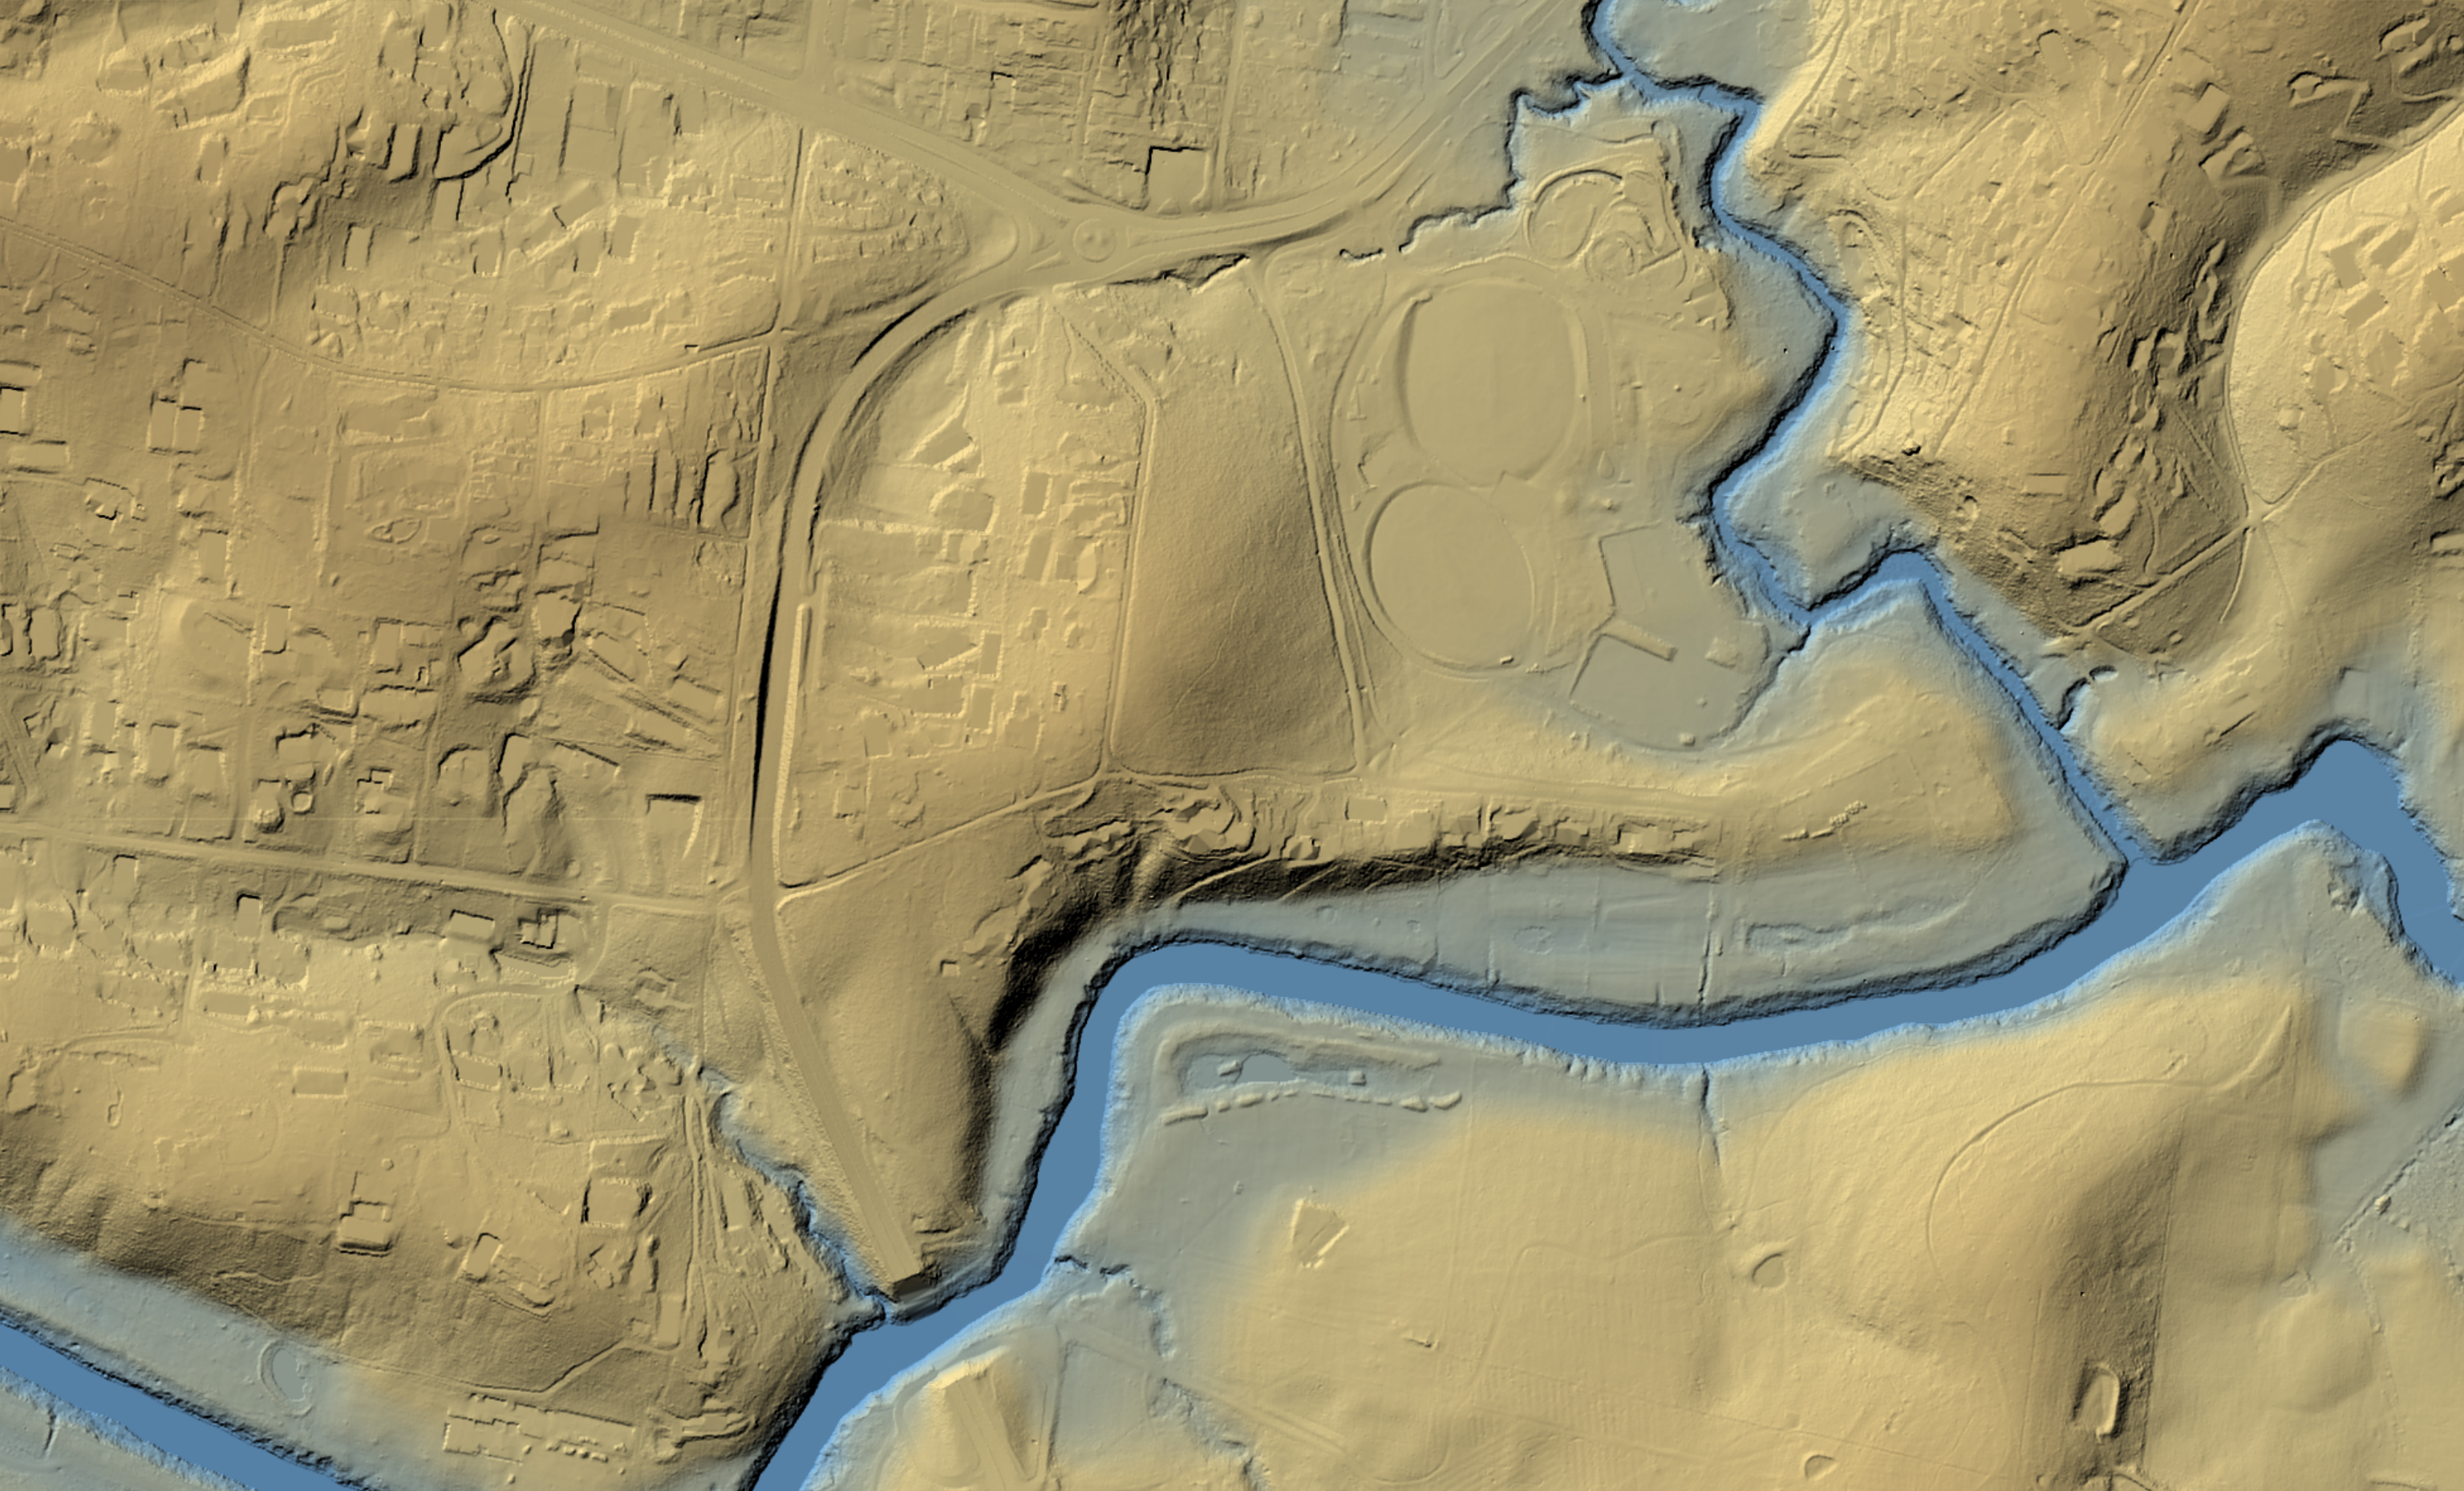 A LiDAR 1m representation of bare earth Melbourne, with shading and colour and shading used to show the contours of the landscape. Waterways are shaded in blue and the ground in earthy tones.